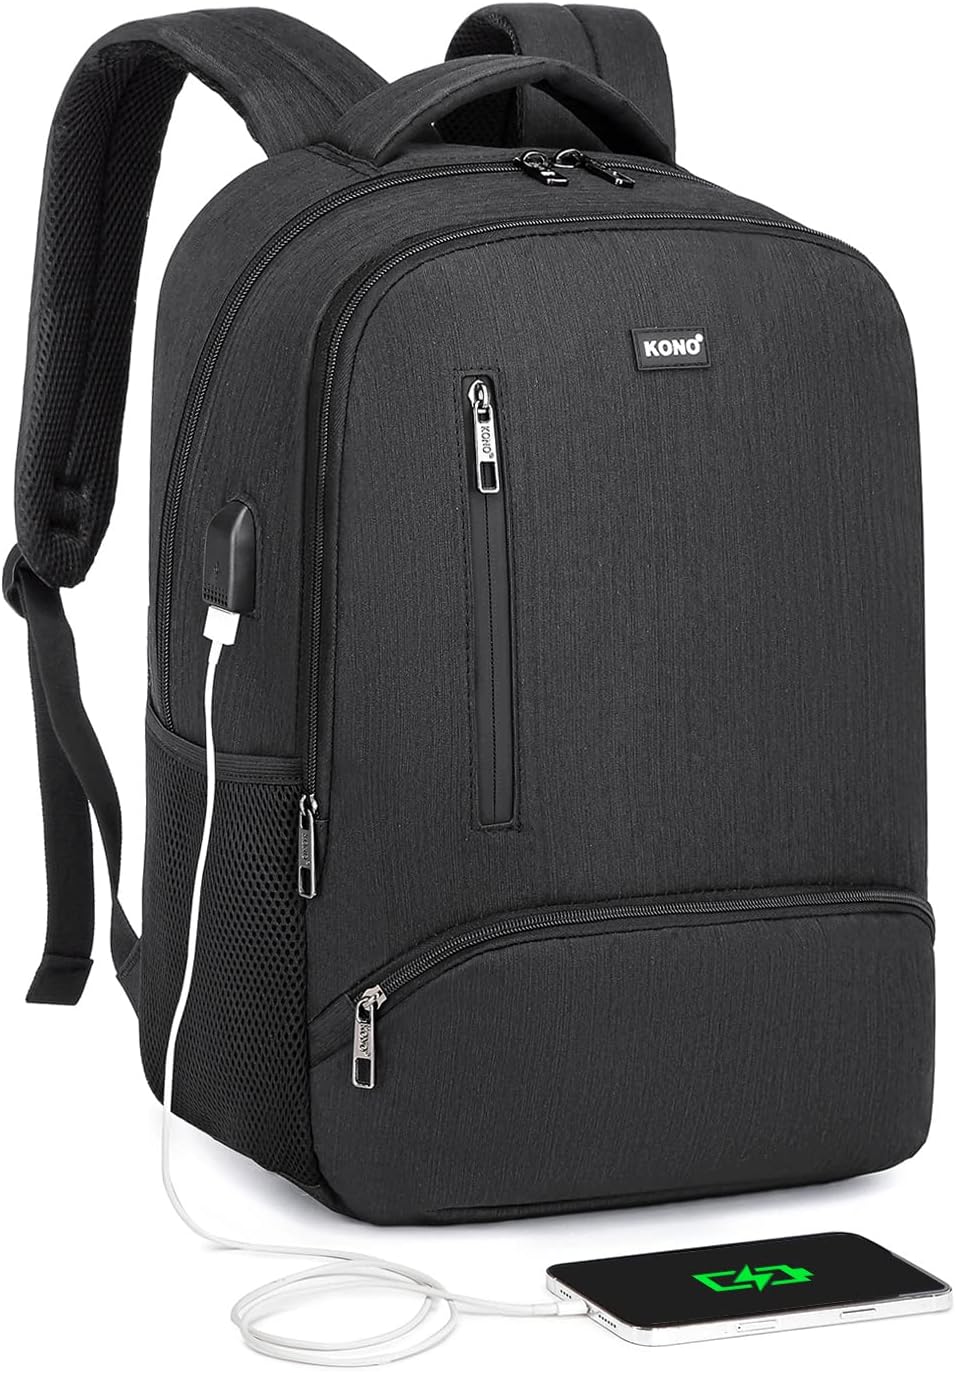 Kono Travel Laptop Backpack with USB Charging Port Water Resistant Work Business Computer Bag Schoolbag Rucksack for Women Men Casual Daypack Fits 15.6 Inch Laptop